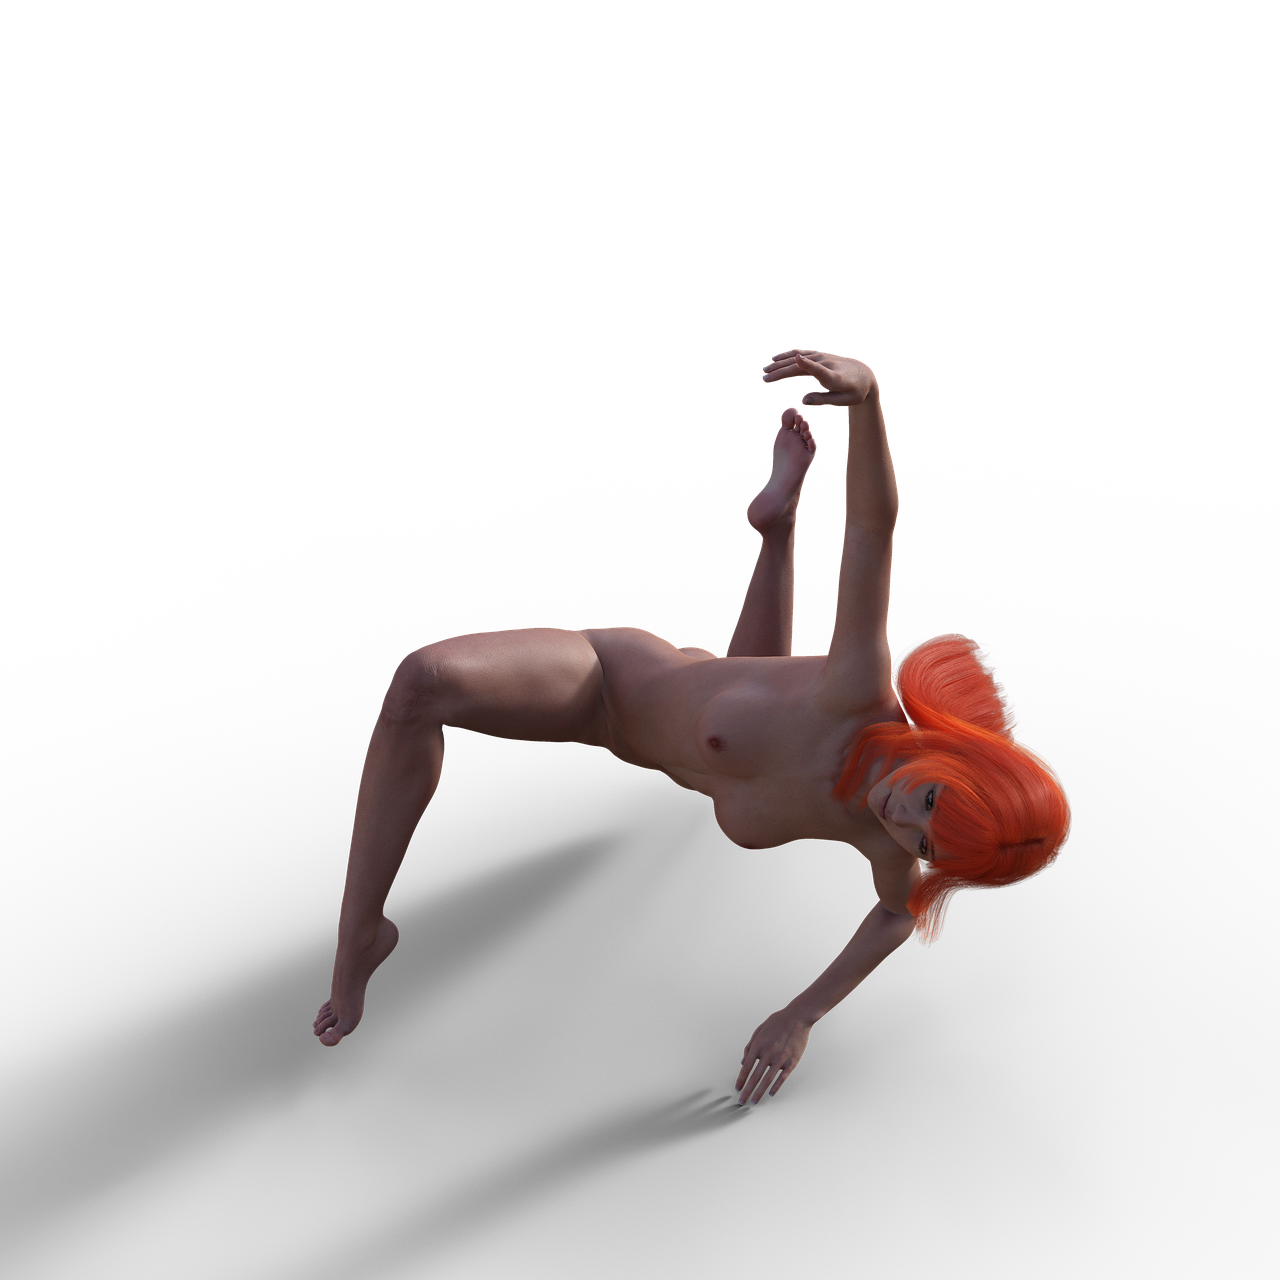 a woman with red hair doing a trick on a skateboard, inspired by Leonor Fini, digital art, 3 d render of a full female body, on a black background, hanging upside down, low quality 3d model